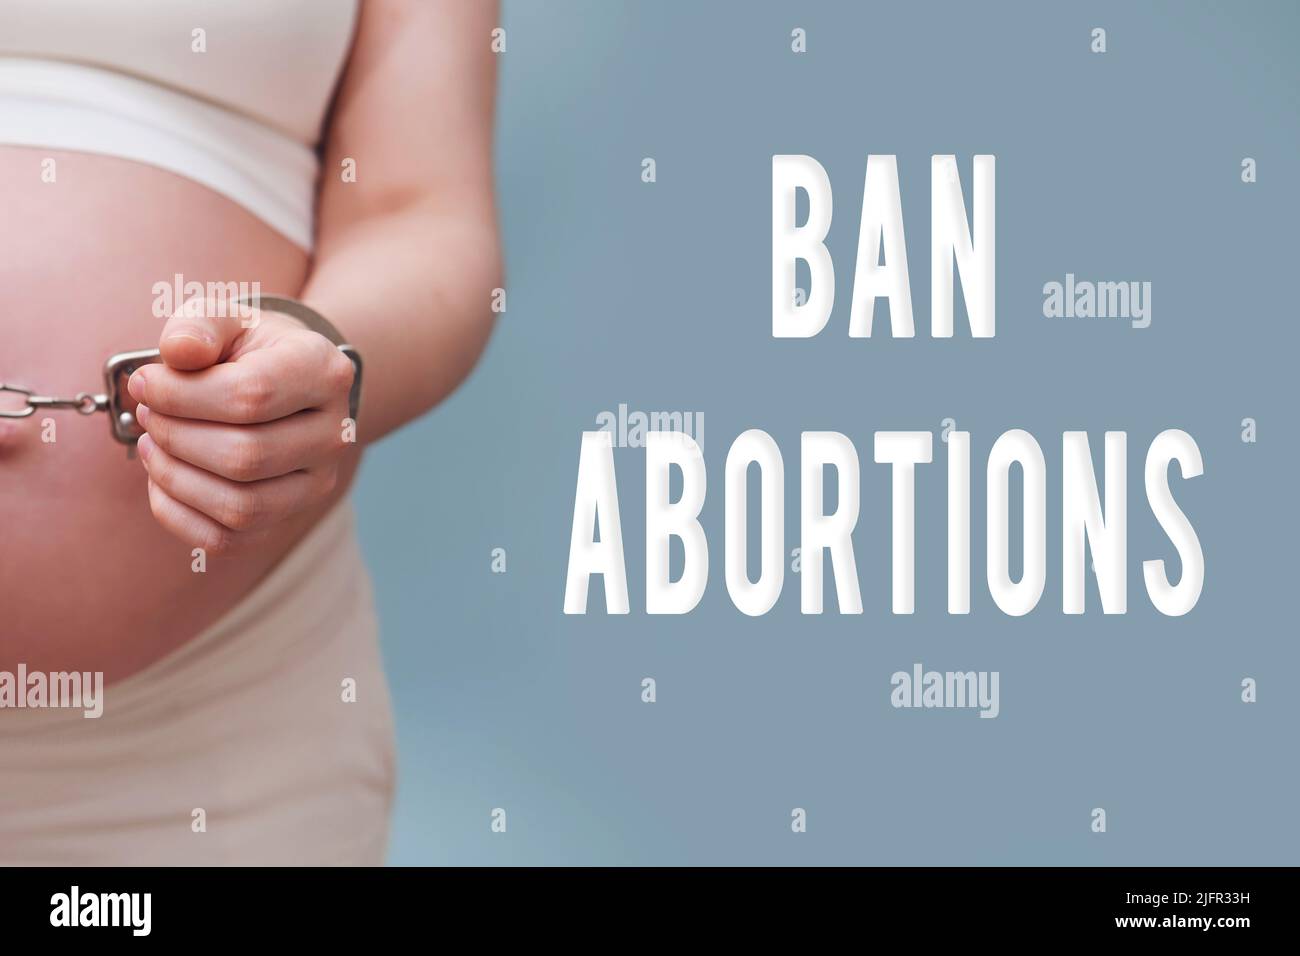 Text about the ban on abortions and chained hands of a pregnant woman, studio shot on a blue background Stock Photo